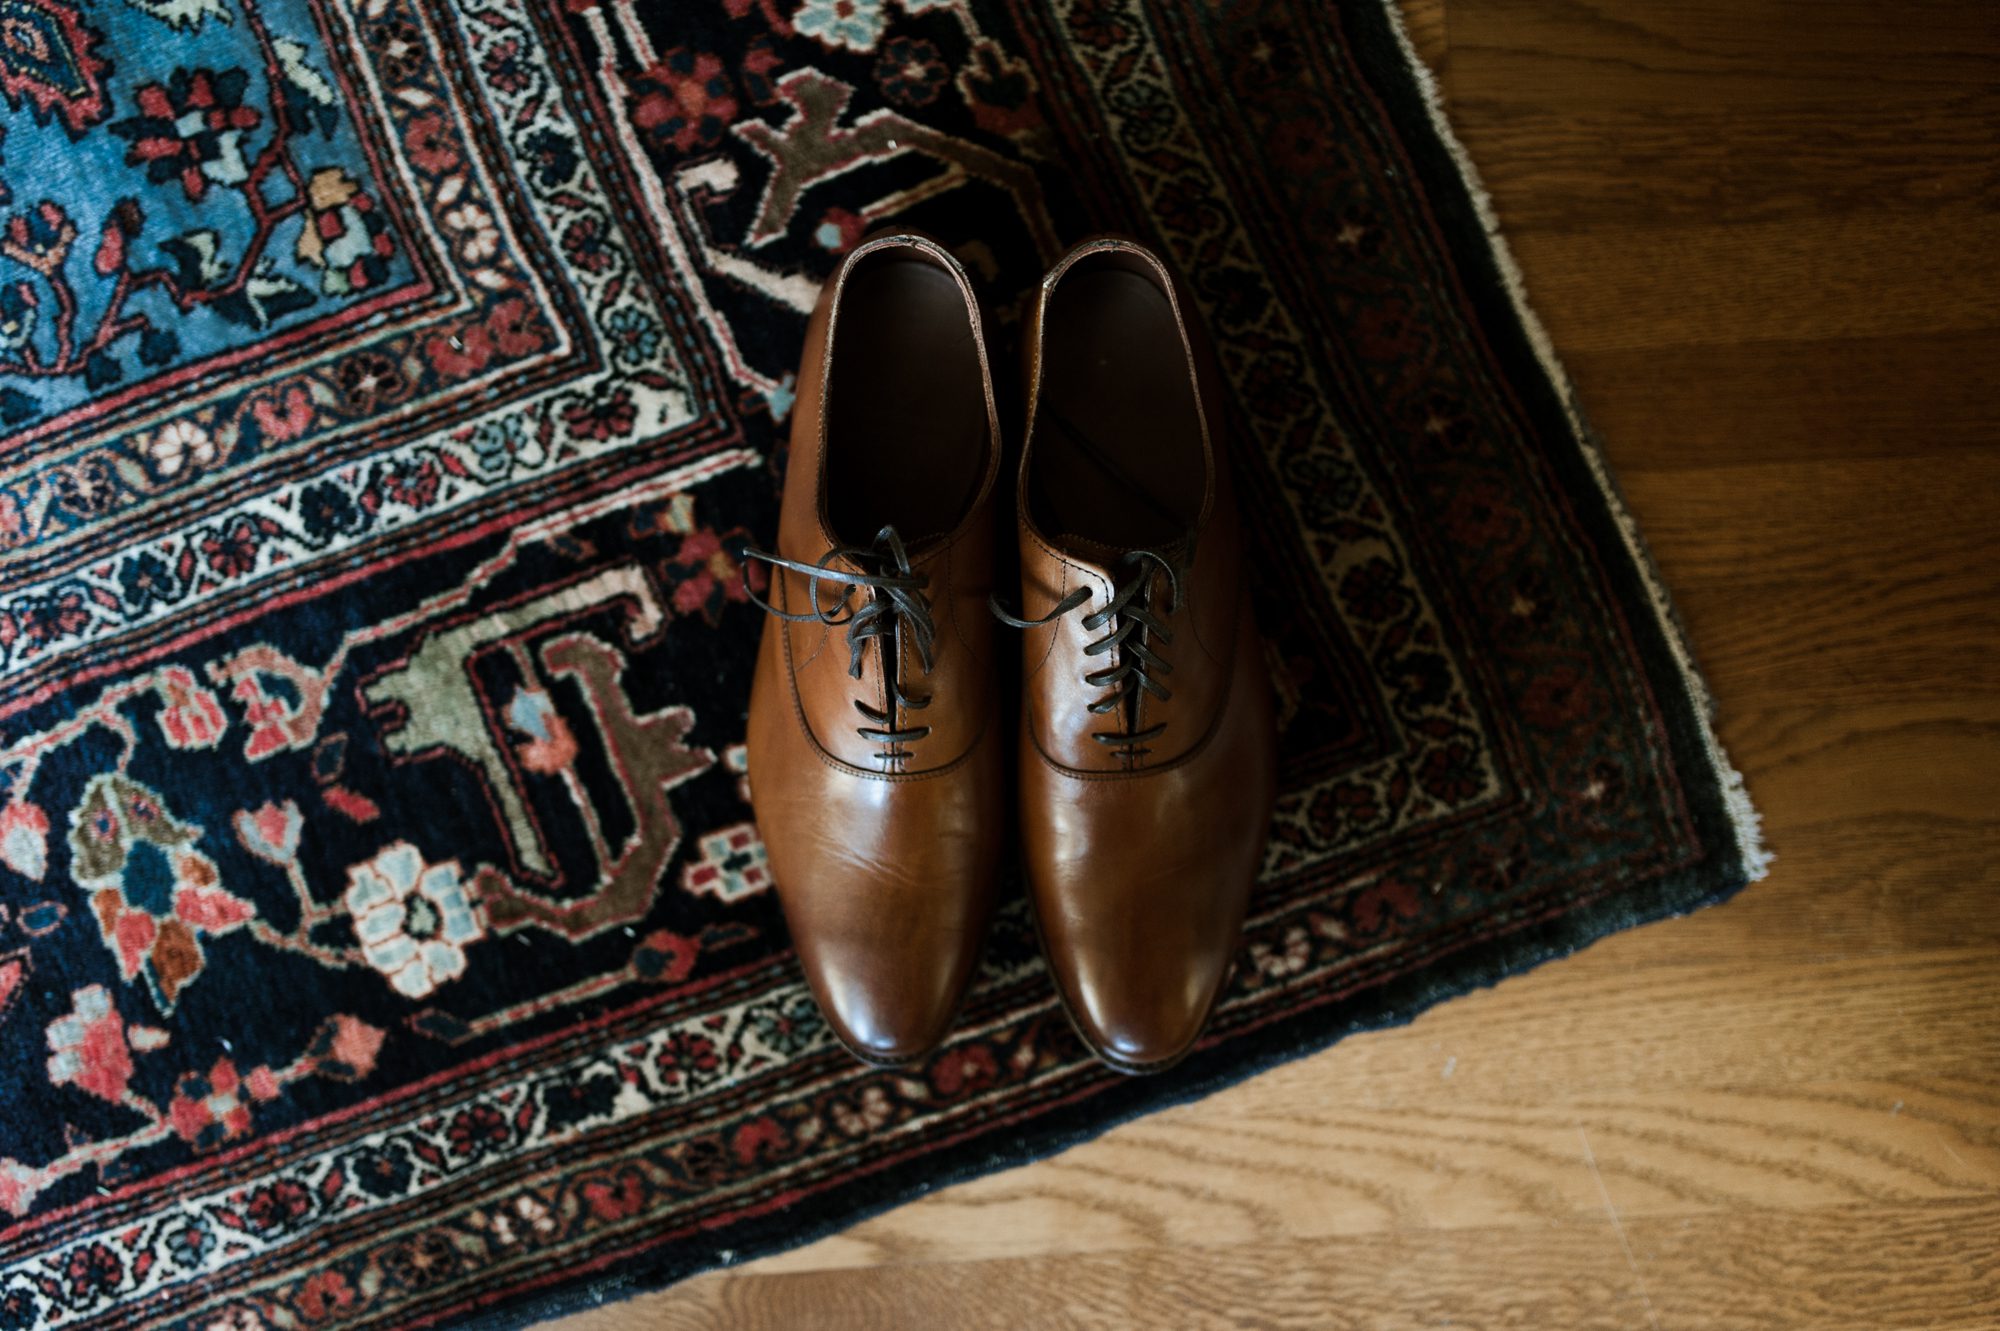 The groom's shoes on a run in the Portland Mayor's Mansion. By Laurelhurst Park wedding photographer Briana Morrison